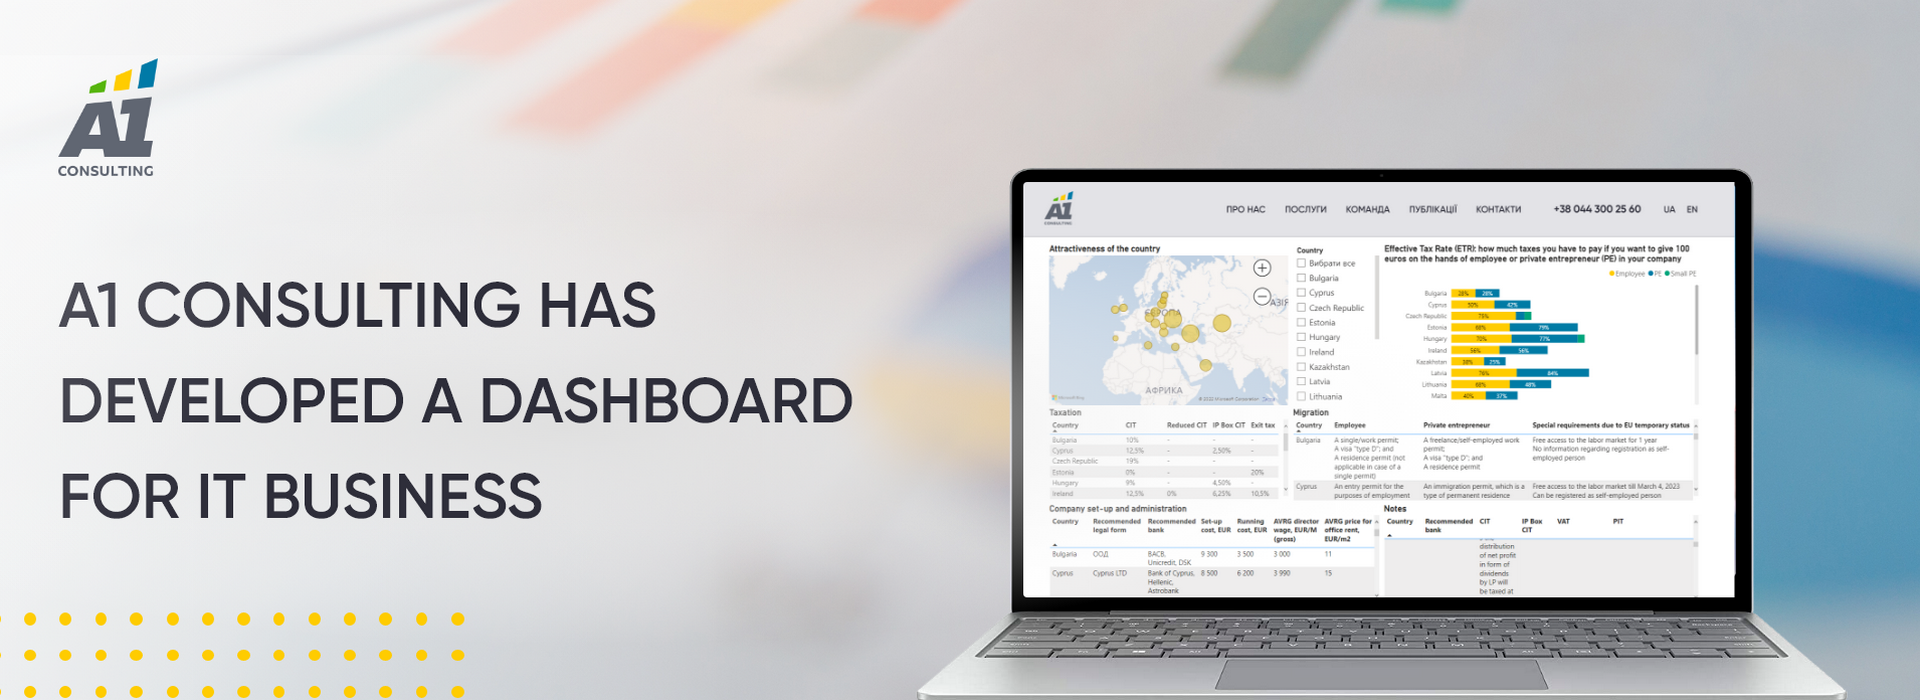 A1 Consulting Has Developed a Dashboard for IT Business